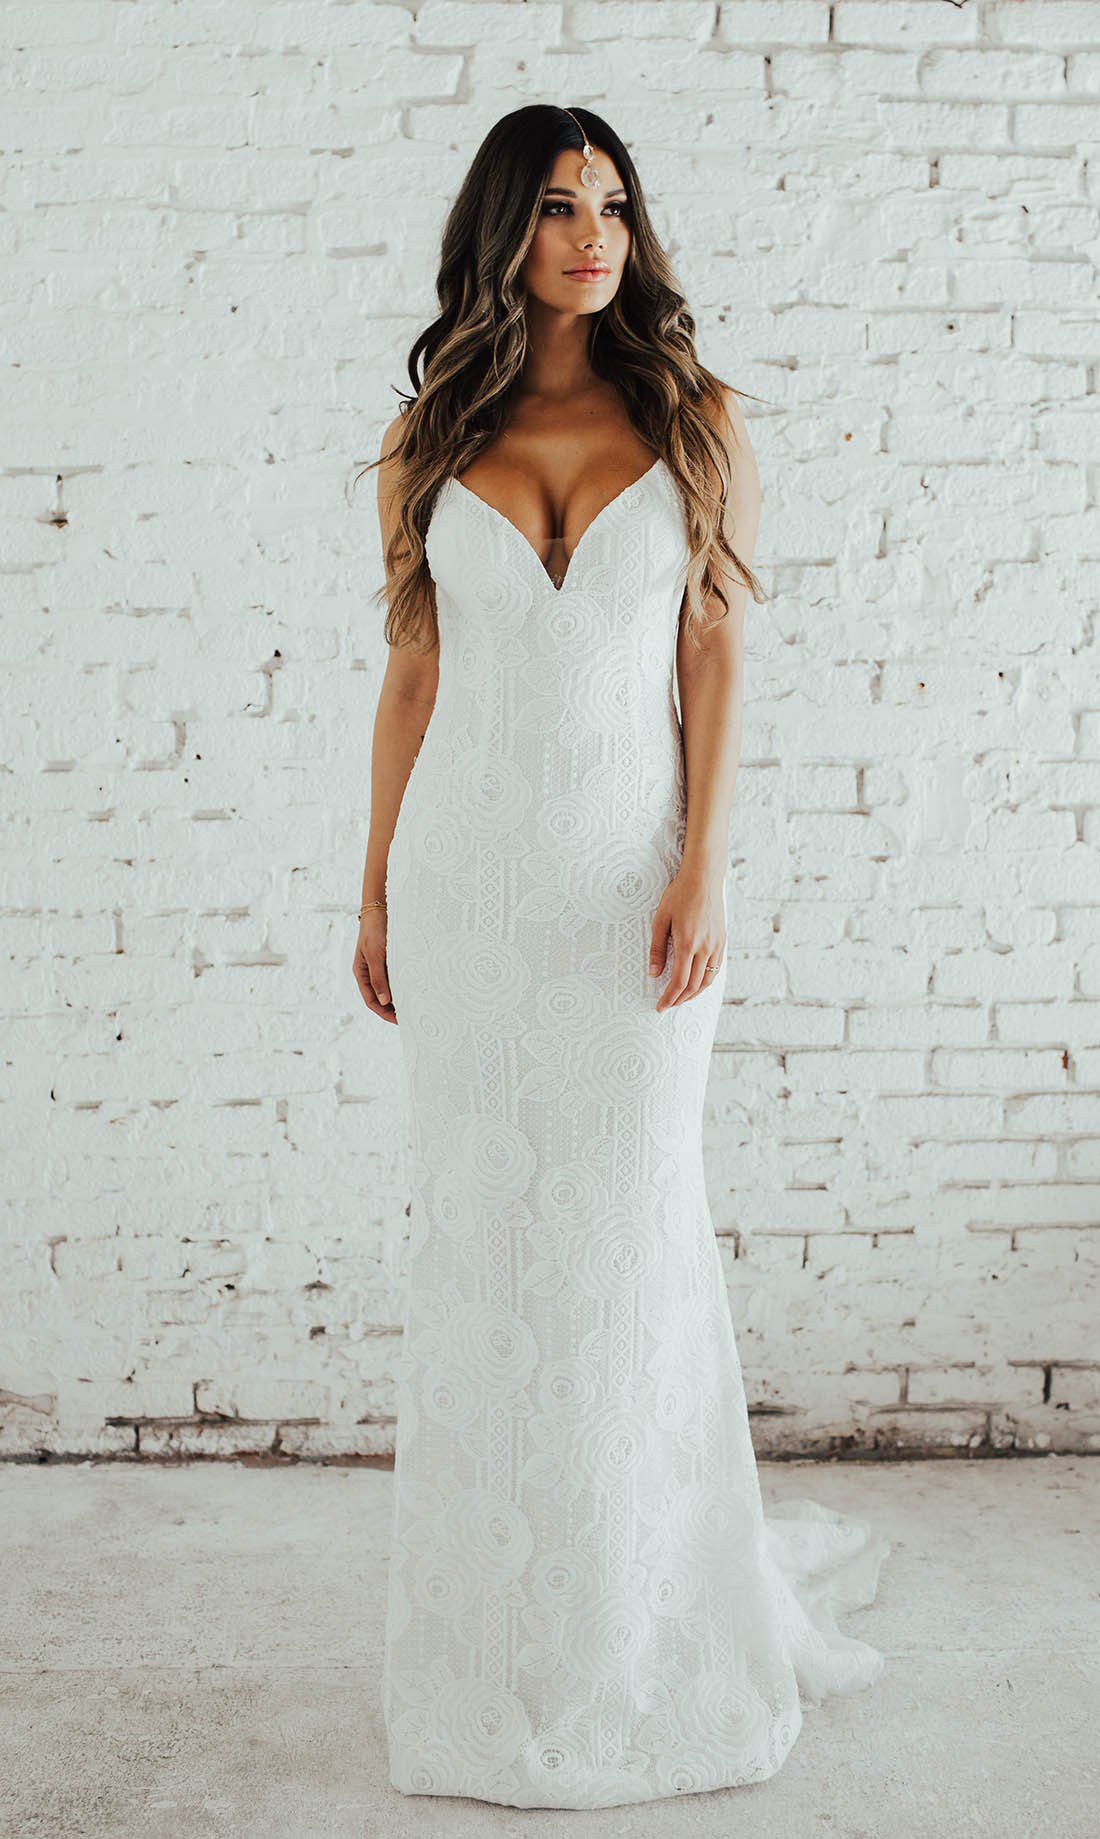 Katie May Cape Cod Sample Wedding Dress on Sale 53 Off